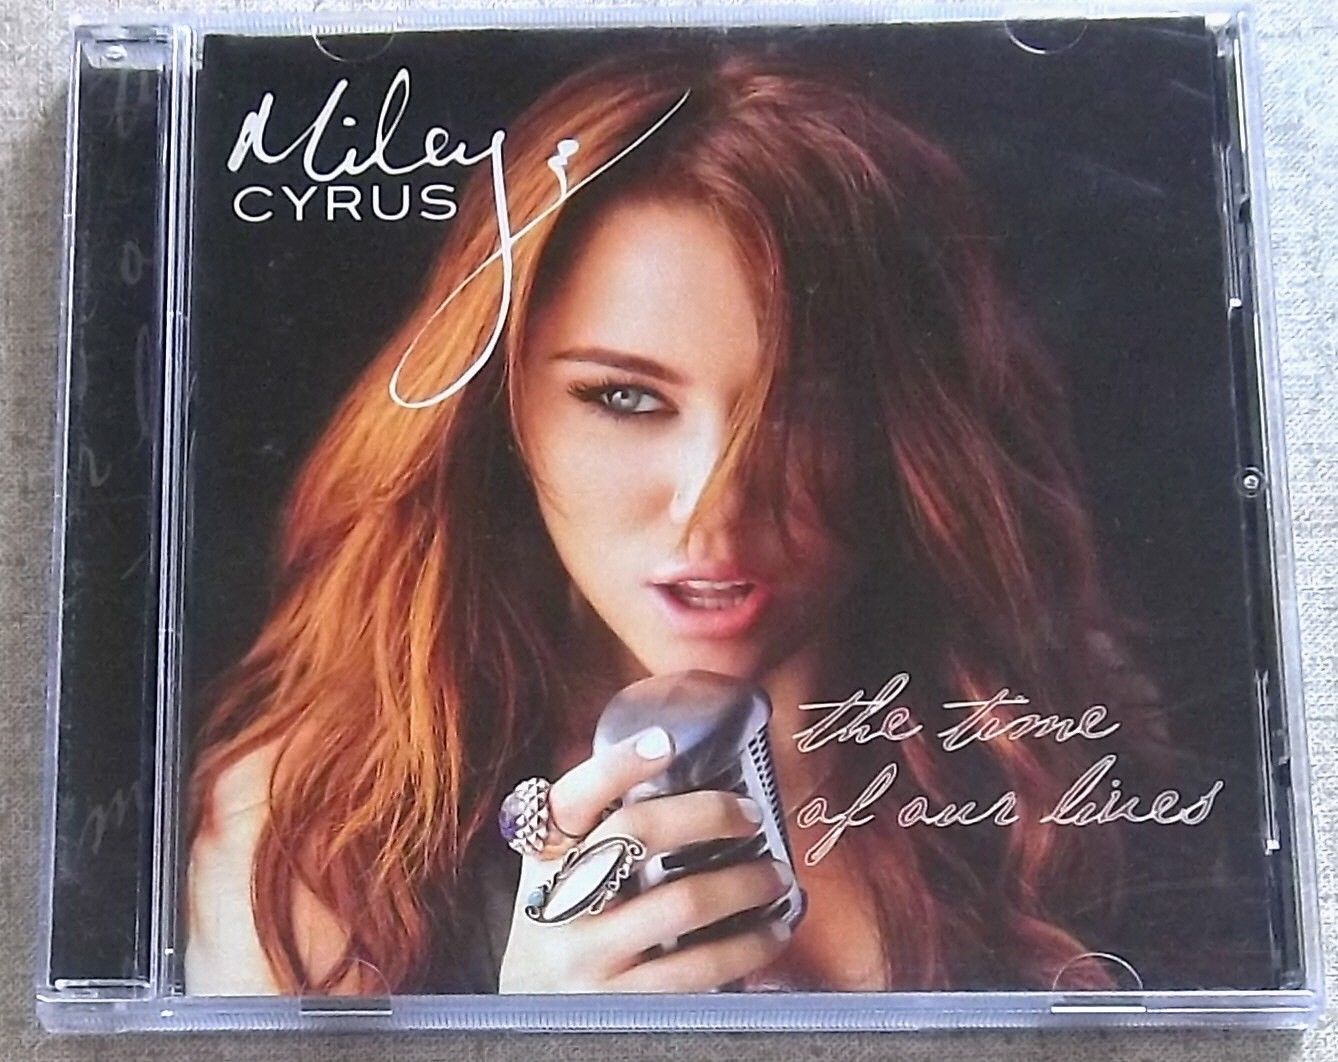 Collection of Time of our lives miley Free